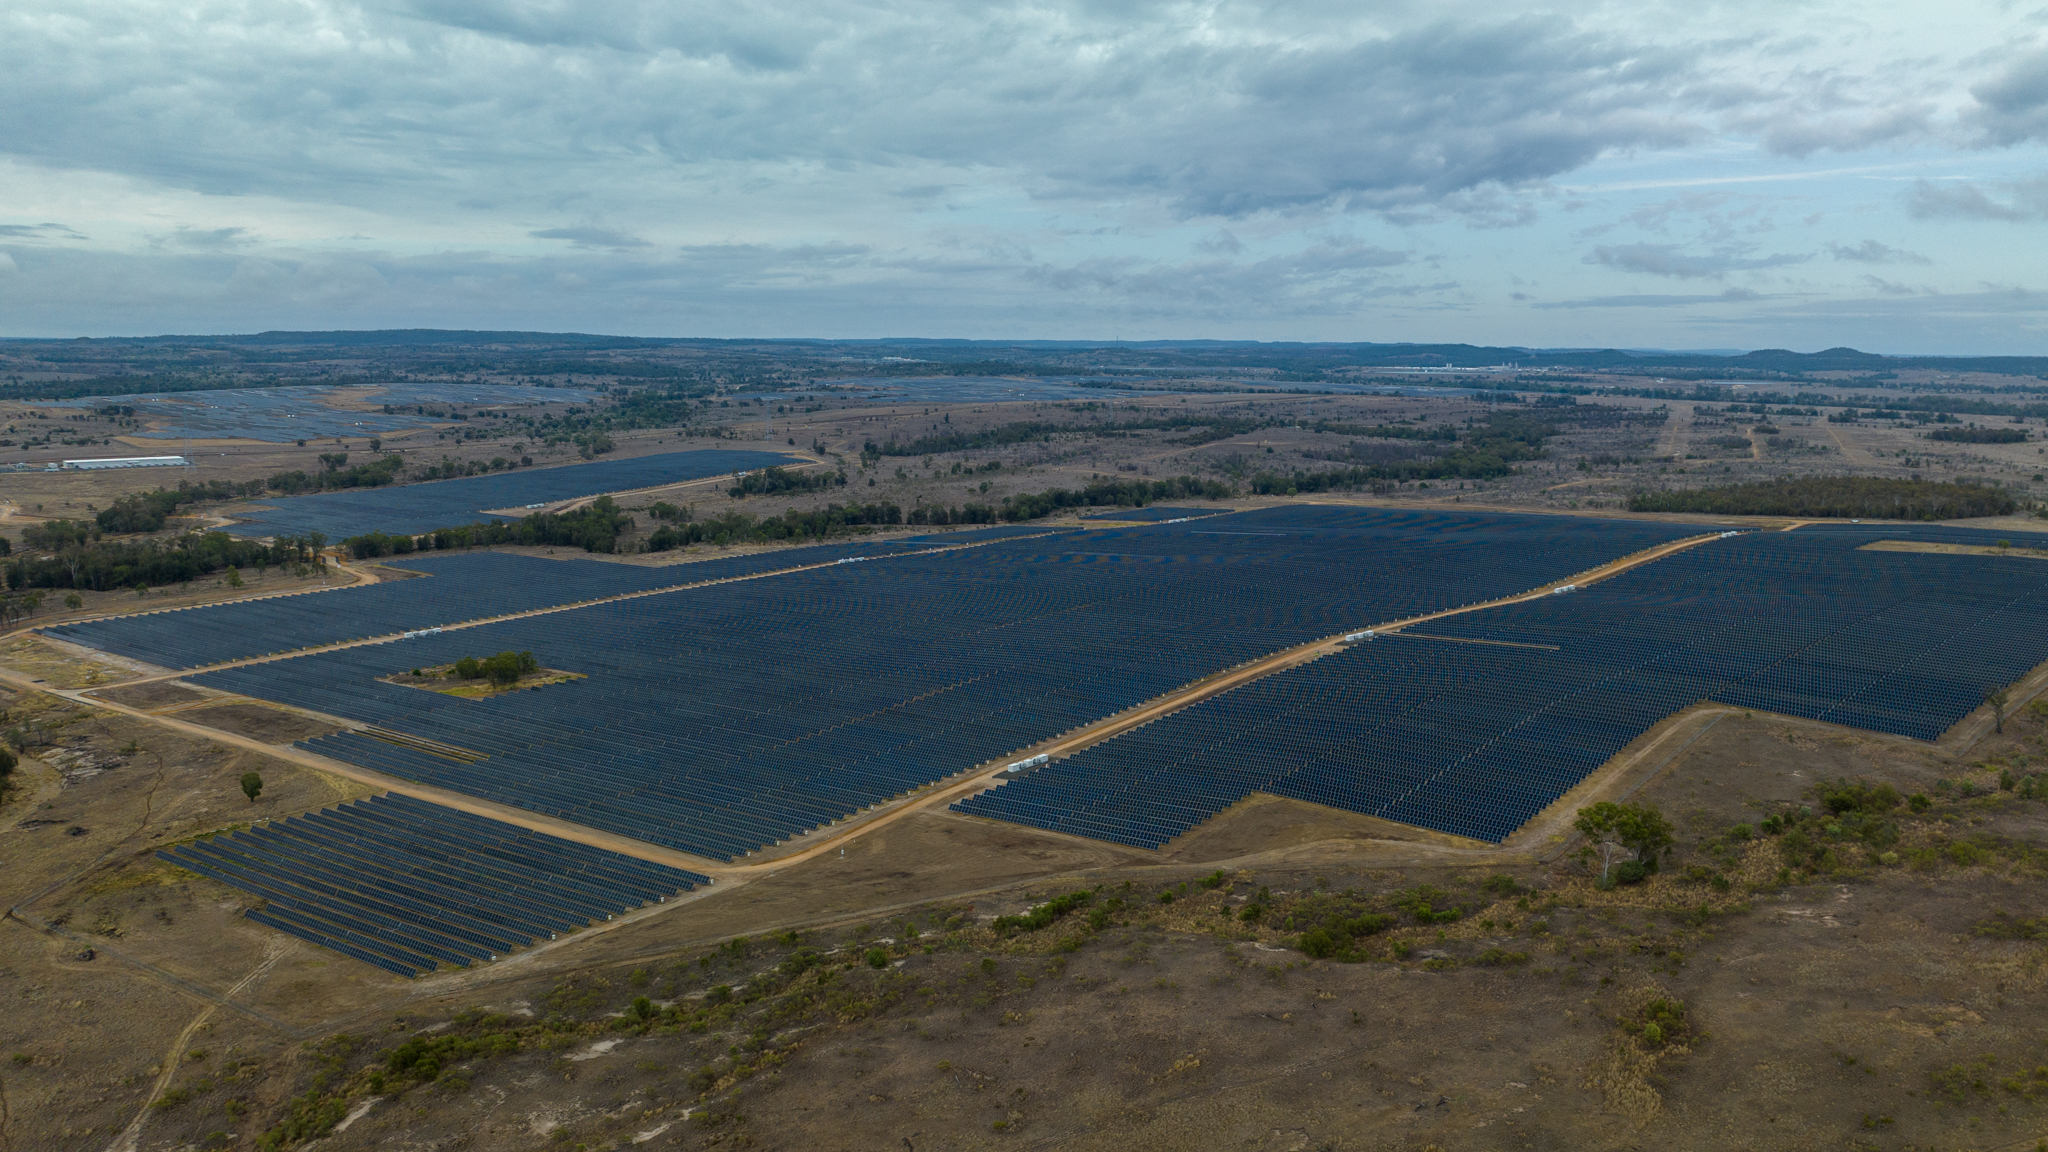 AMAZON AND VENA ENERGY ANNOUNCE 125 MW SOLAR PROJECT IN QUEENSLAND